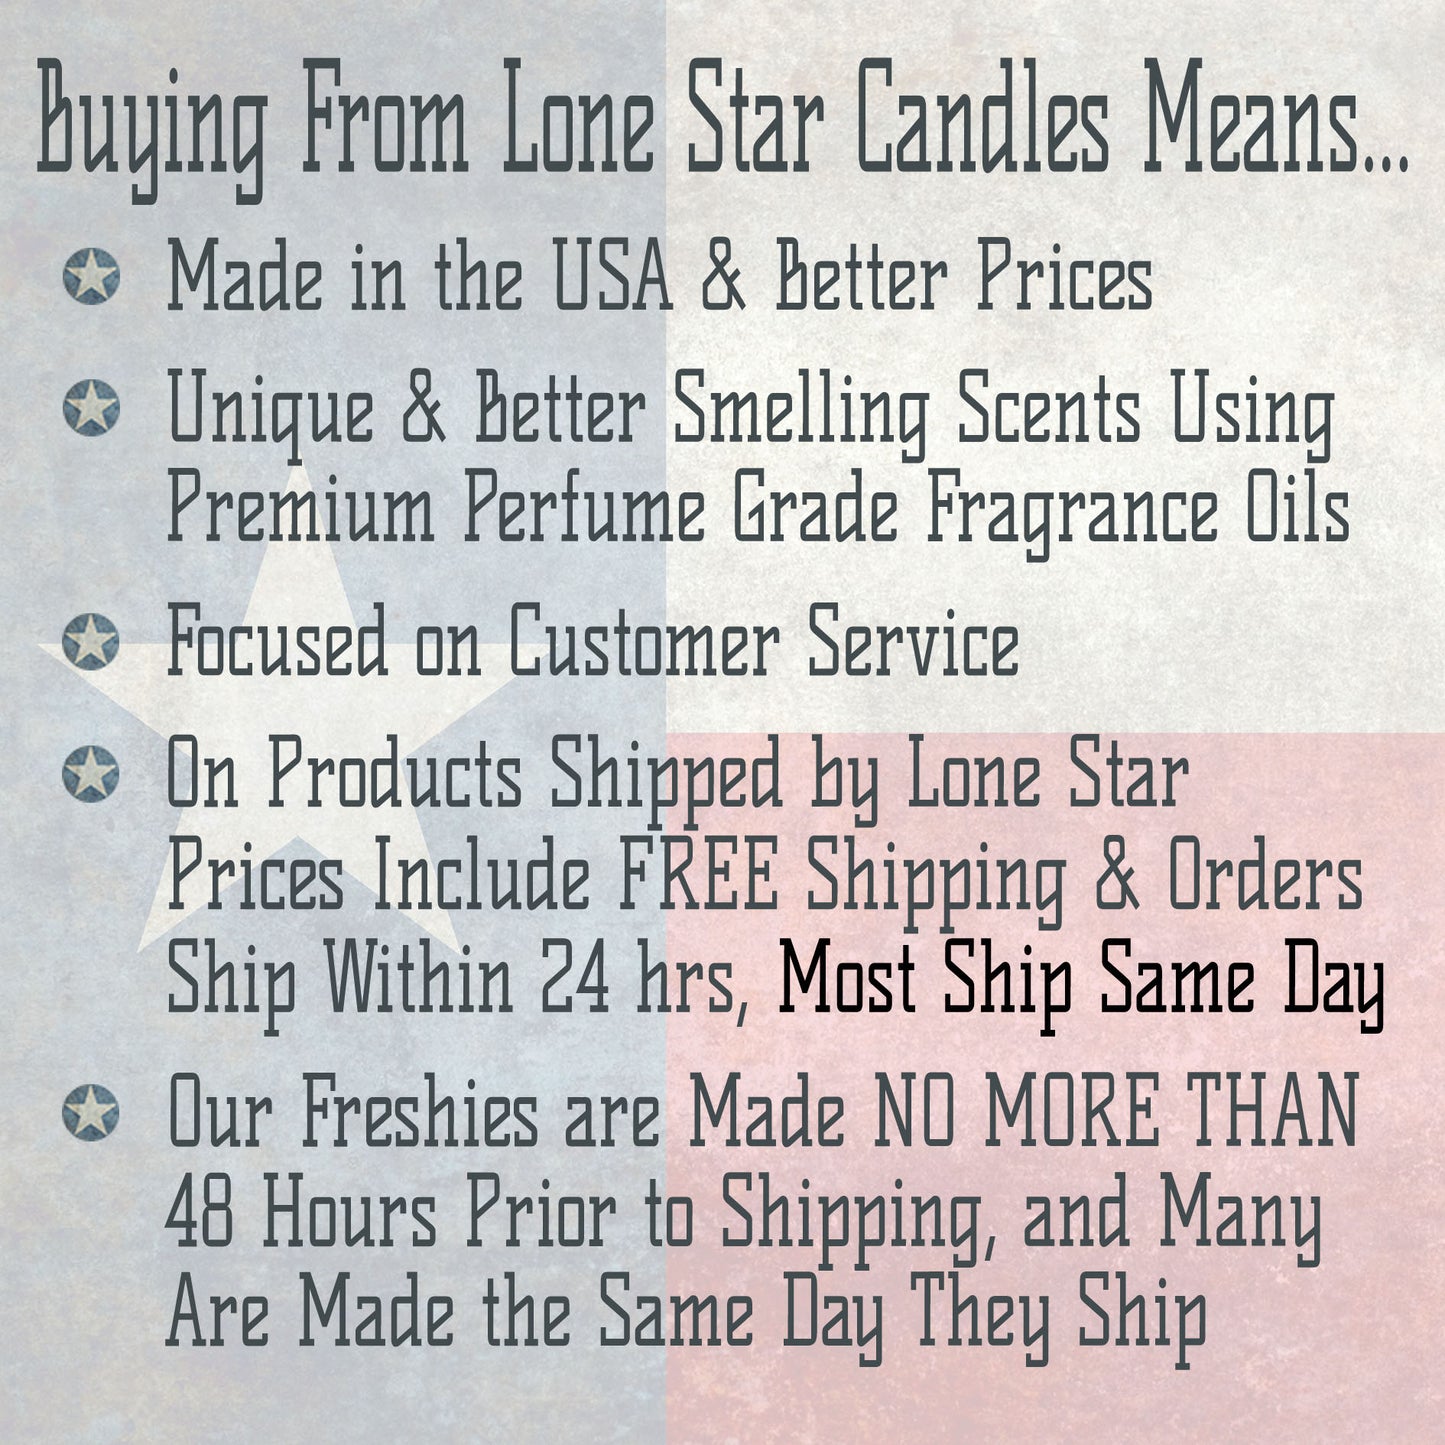 Strawberry Leather, Lone Star Candles & More's Premium Strongly Scented Freshies, Genuine Leather Aroma with Sweet & Juicy Strawberries, Car & Air Freshener, USA Made in Texas, Apple 1-Pack